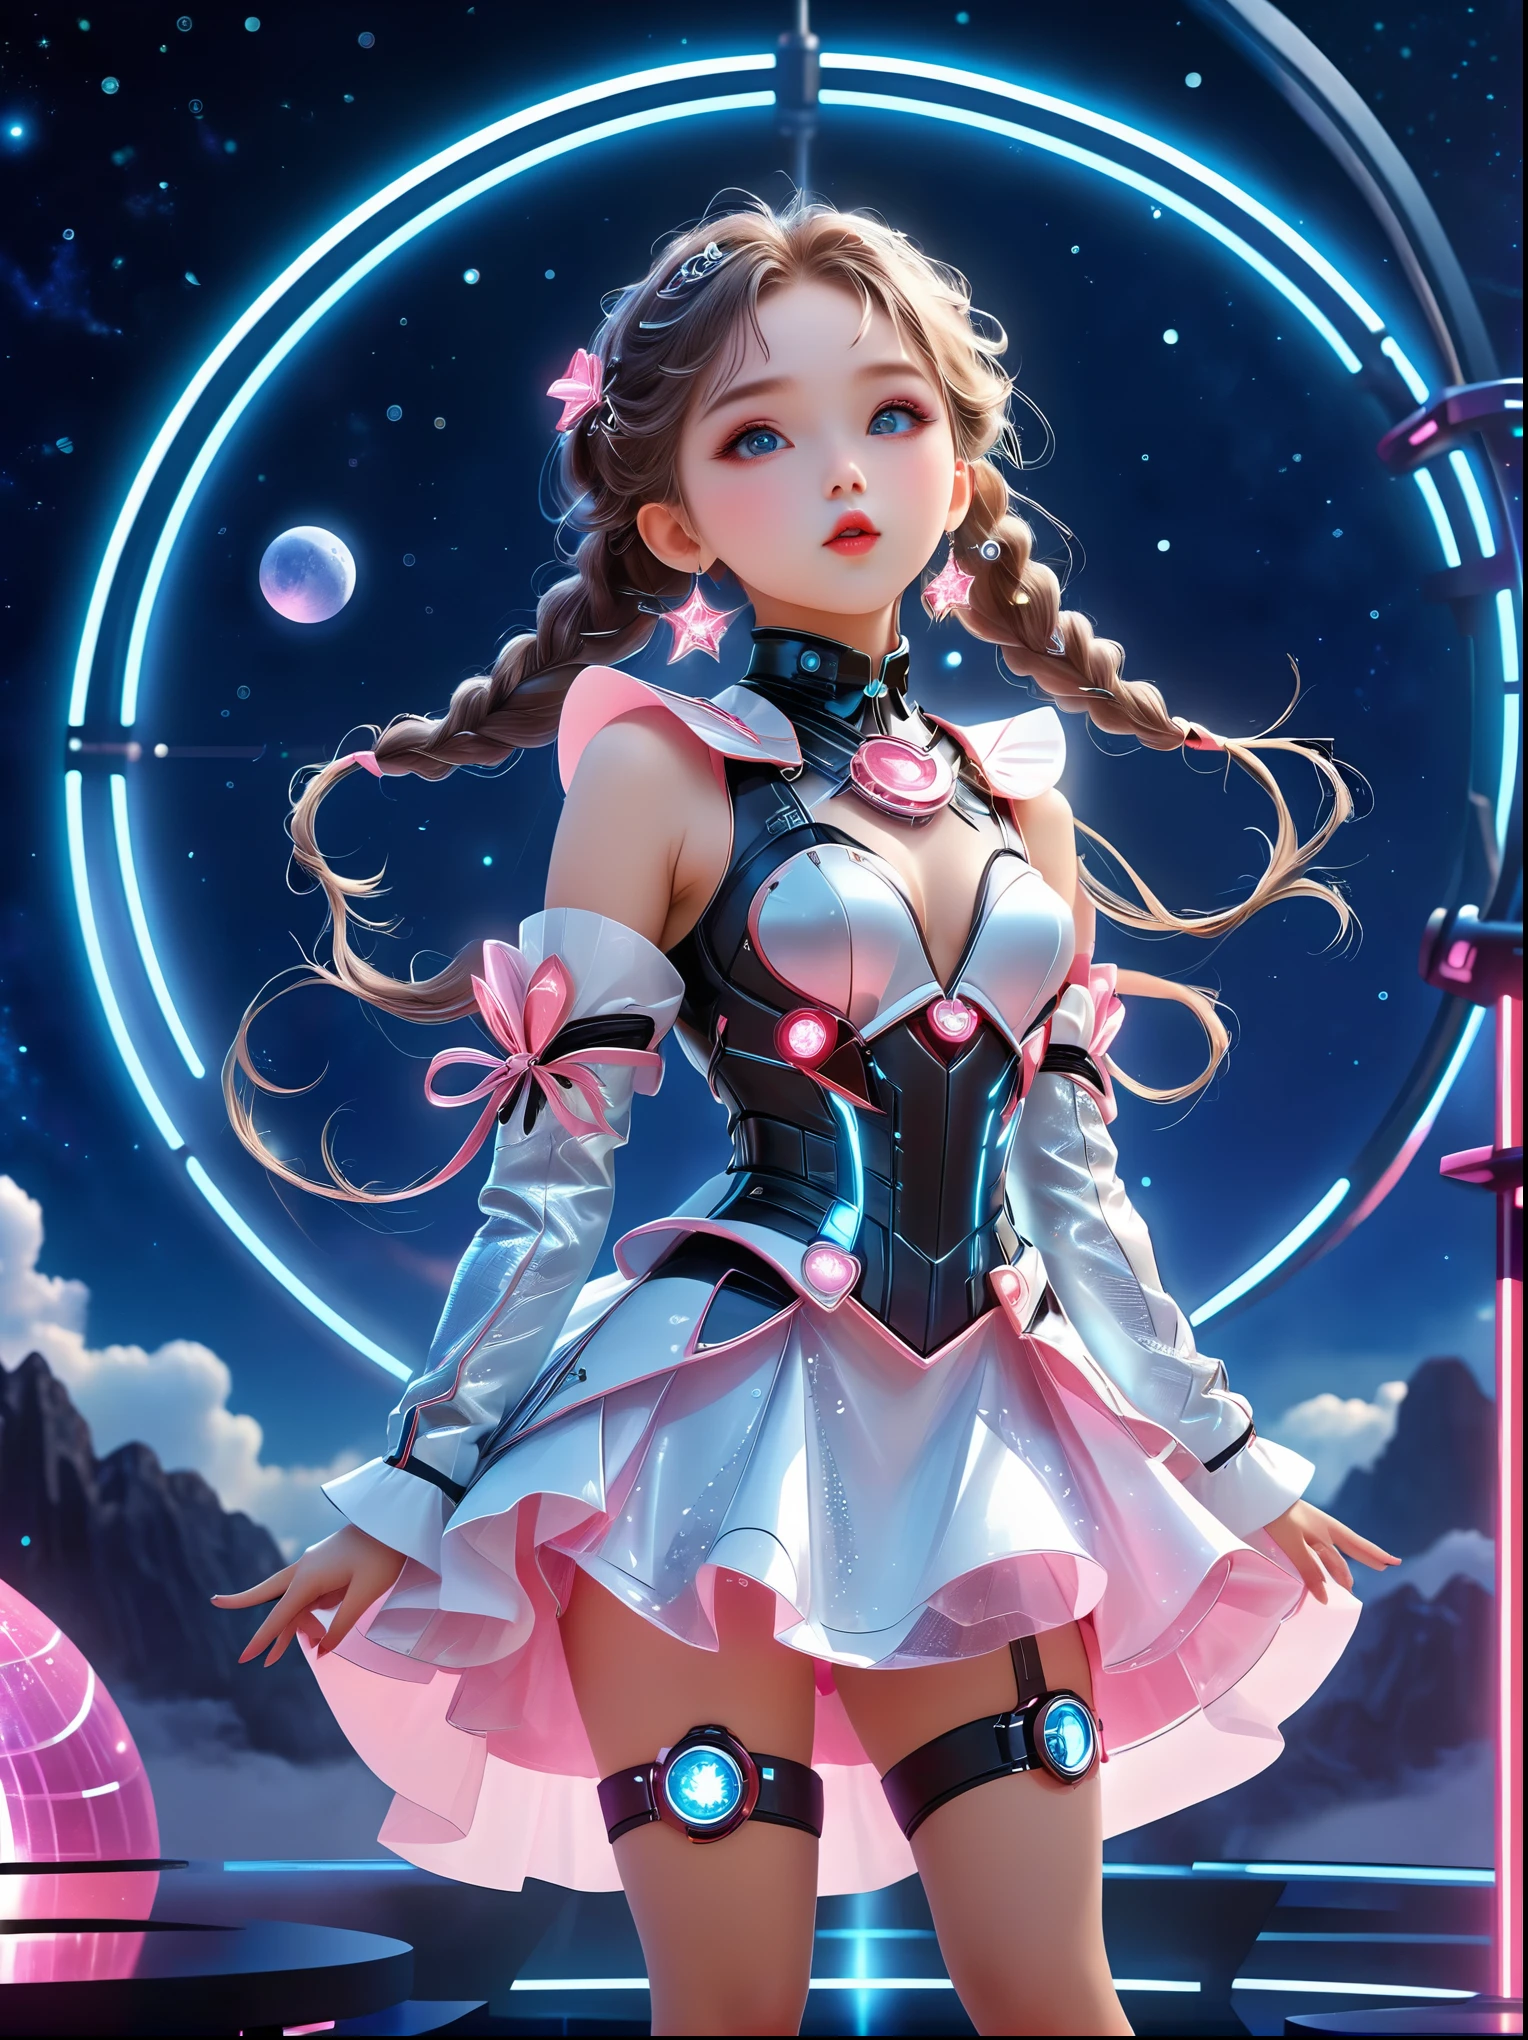 (Vision:1.8), (whole body:1.3), A beautiful young female idol, Wearing futuristic costumes, (Singing on the idol stage:1.6), futuristic stage, (complex stage design:1.3), (Mechanical stage elements:1.5), Dreamy atmosphere, Starry sky background, (Moon craters background:1.5), shining lights, Neon embellished, (Watch idol performances from a distance:1.6), (Stage scene in telescope:1.5)